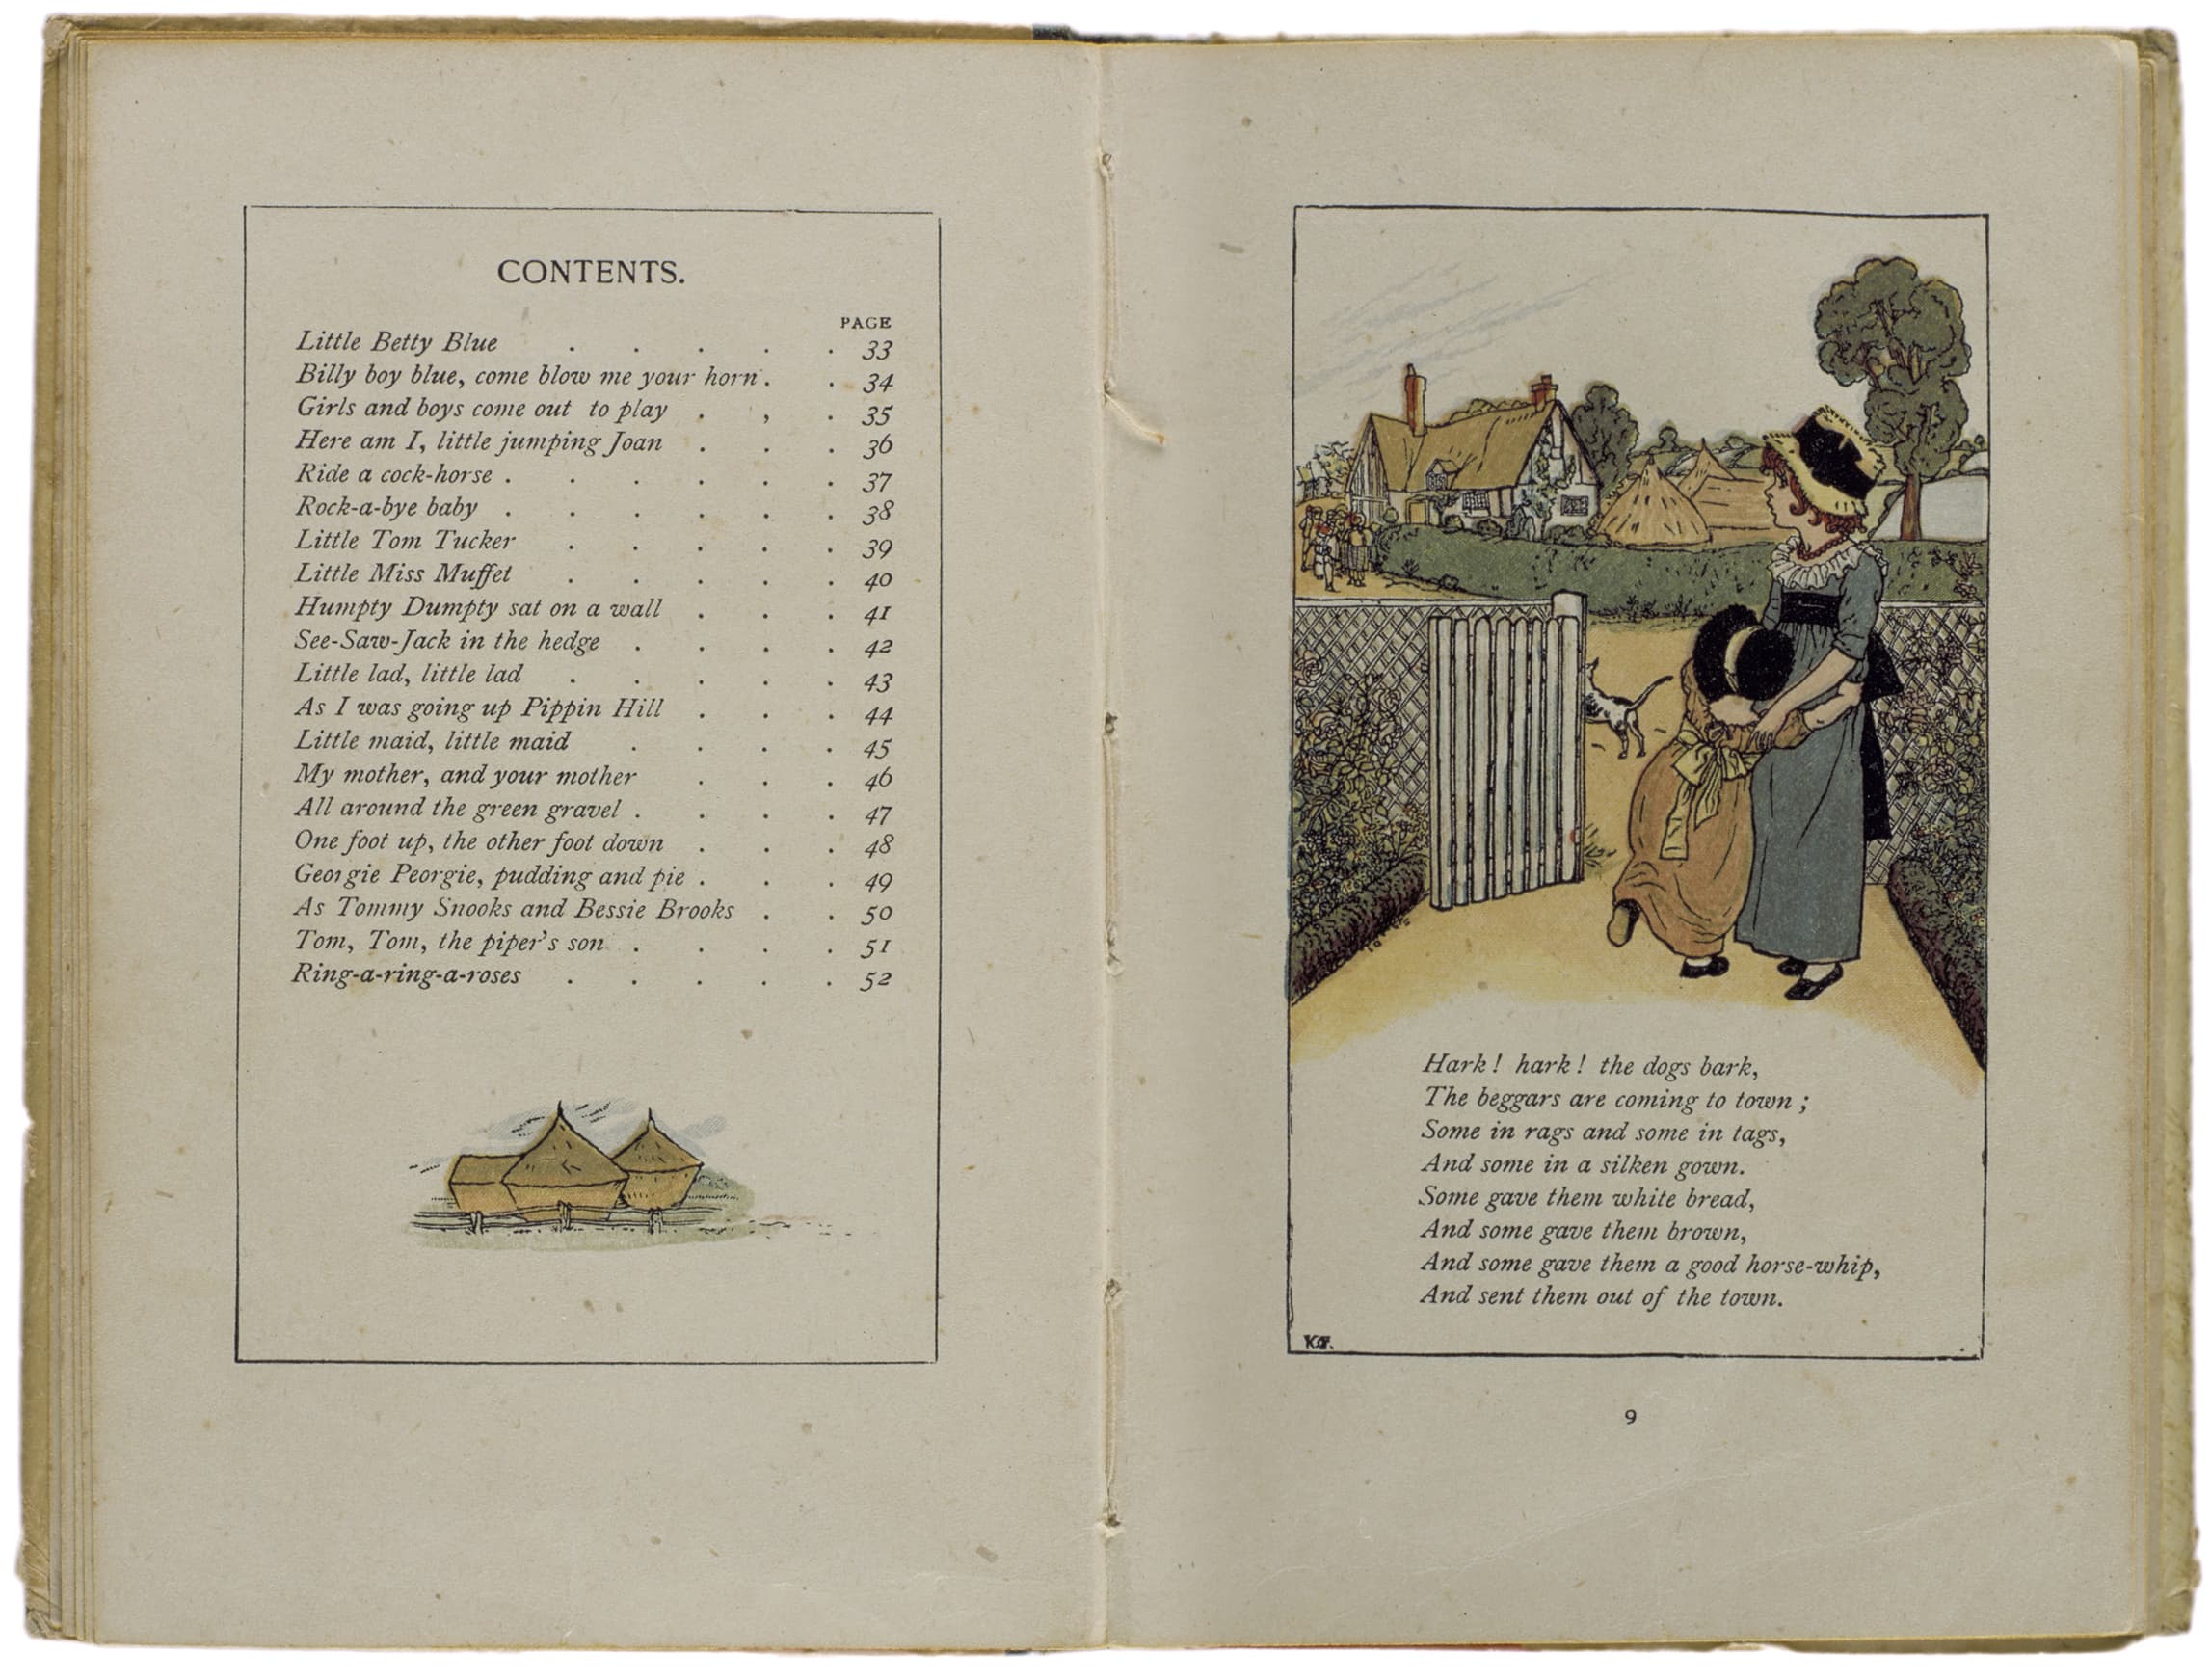 page 8-9 of Mother Goose, contents and main text